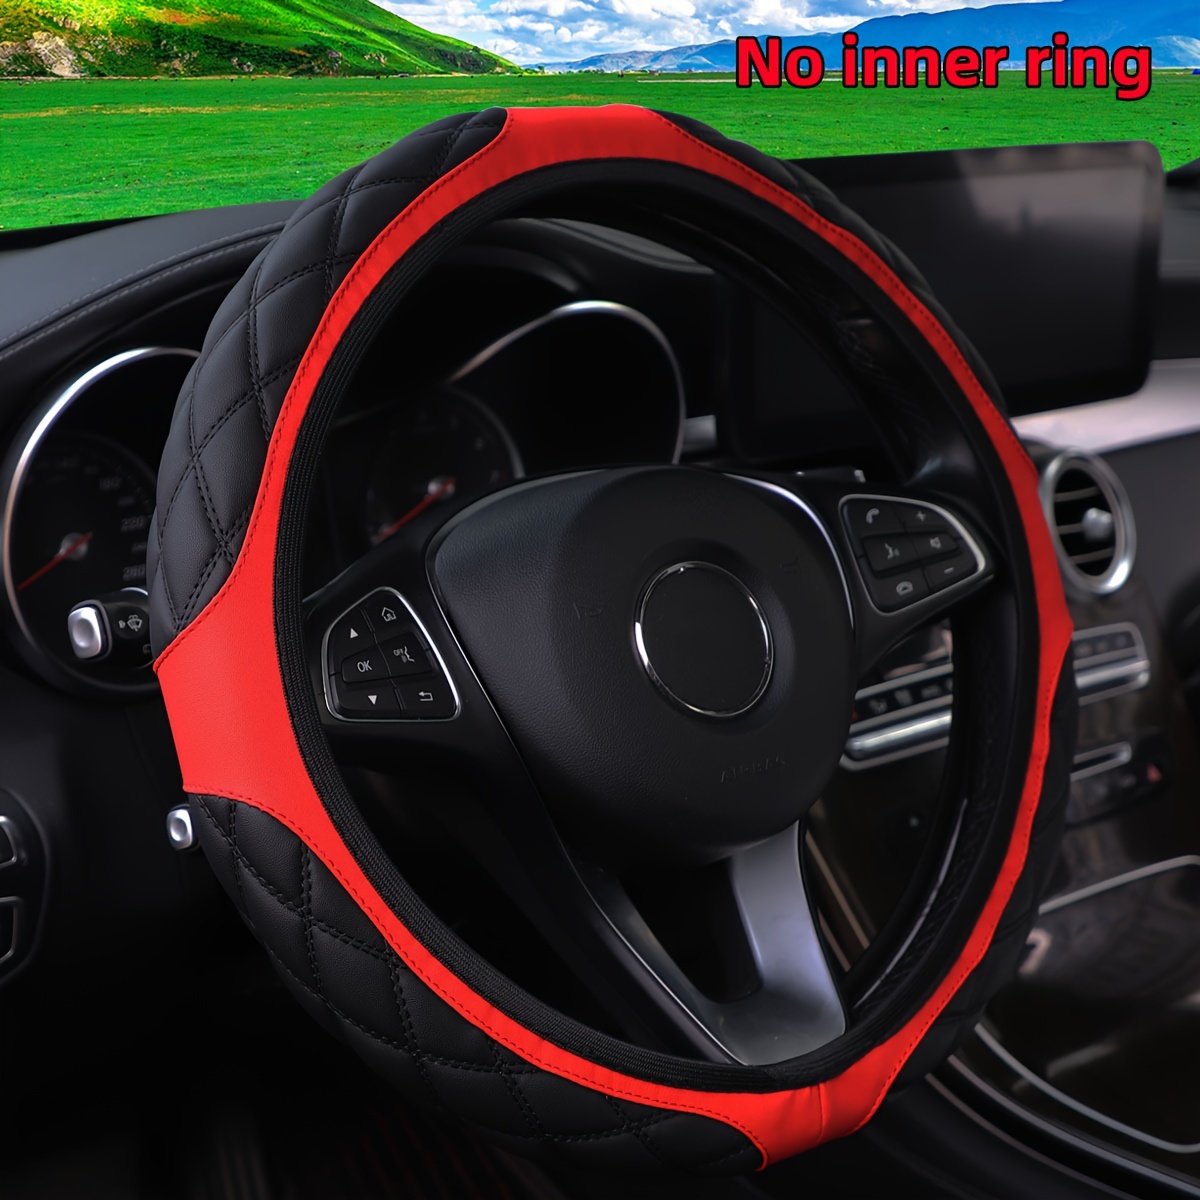 

1pc Wear-resistant Comfortable Pu Leather Three-dimensional Embroidery No Inner Ring Steering Wheel Cover For 14.5-15inch Steering Wheel For Women